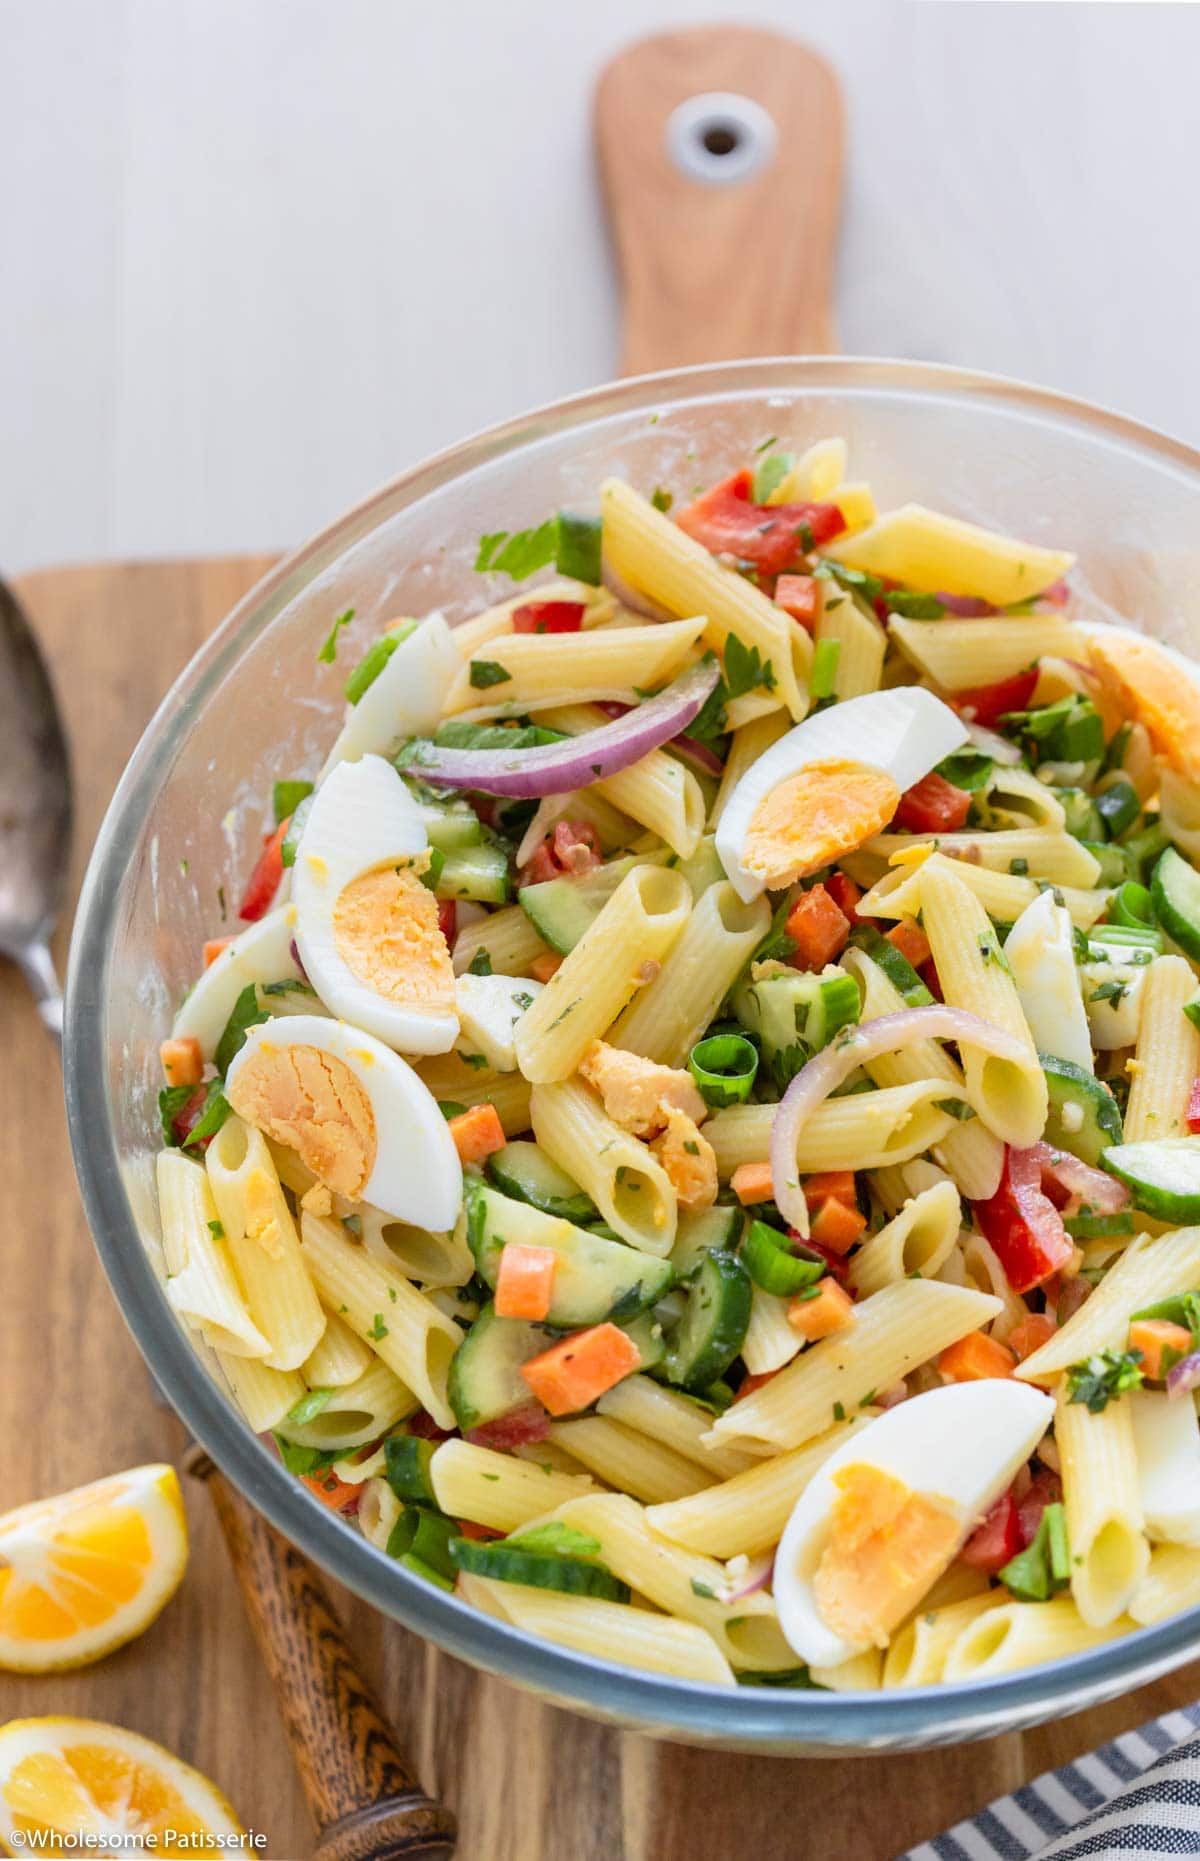 Close up image showing sliced egg and vegetables in salad ready to serve